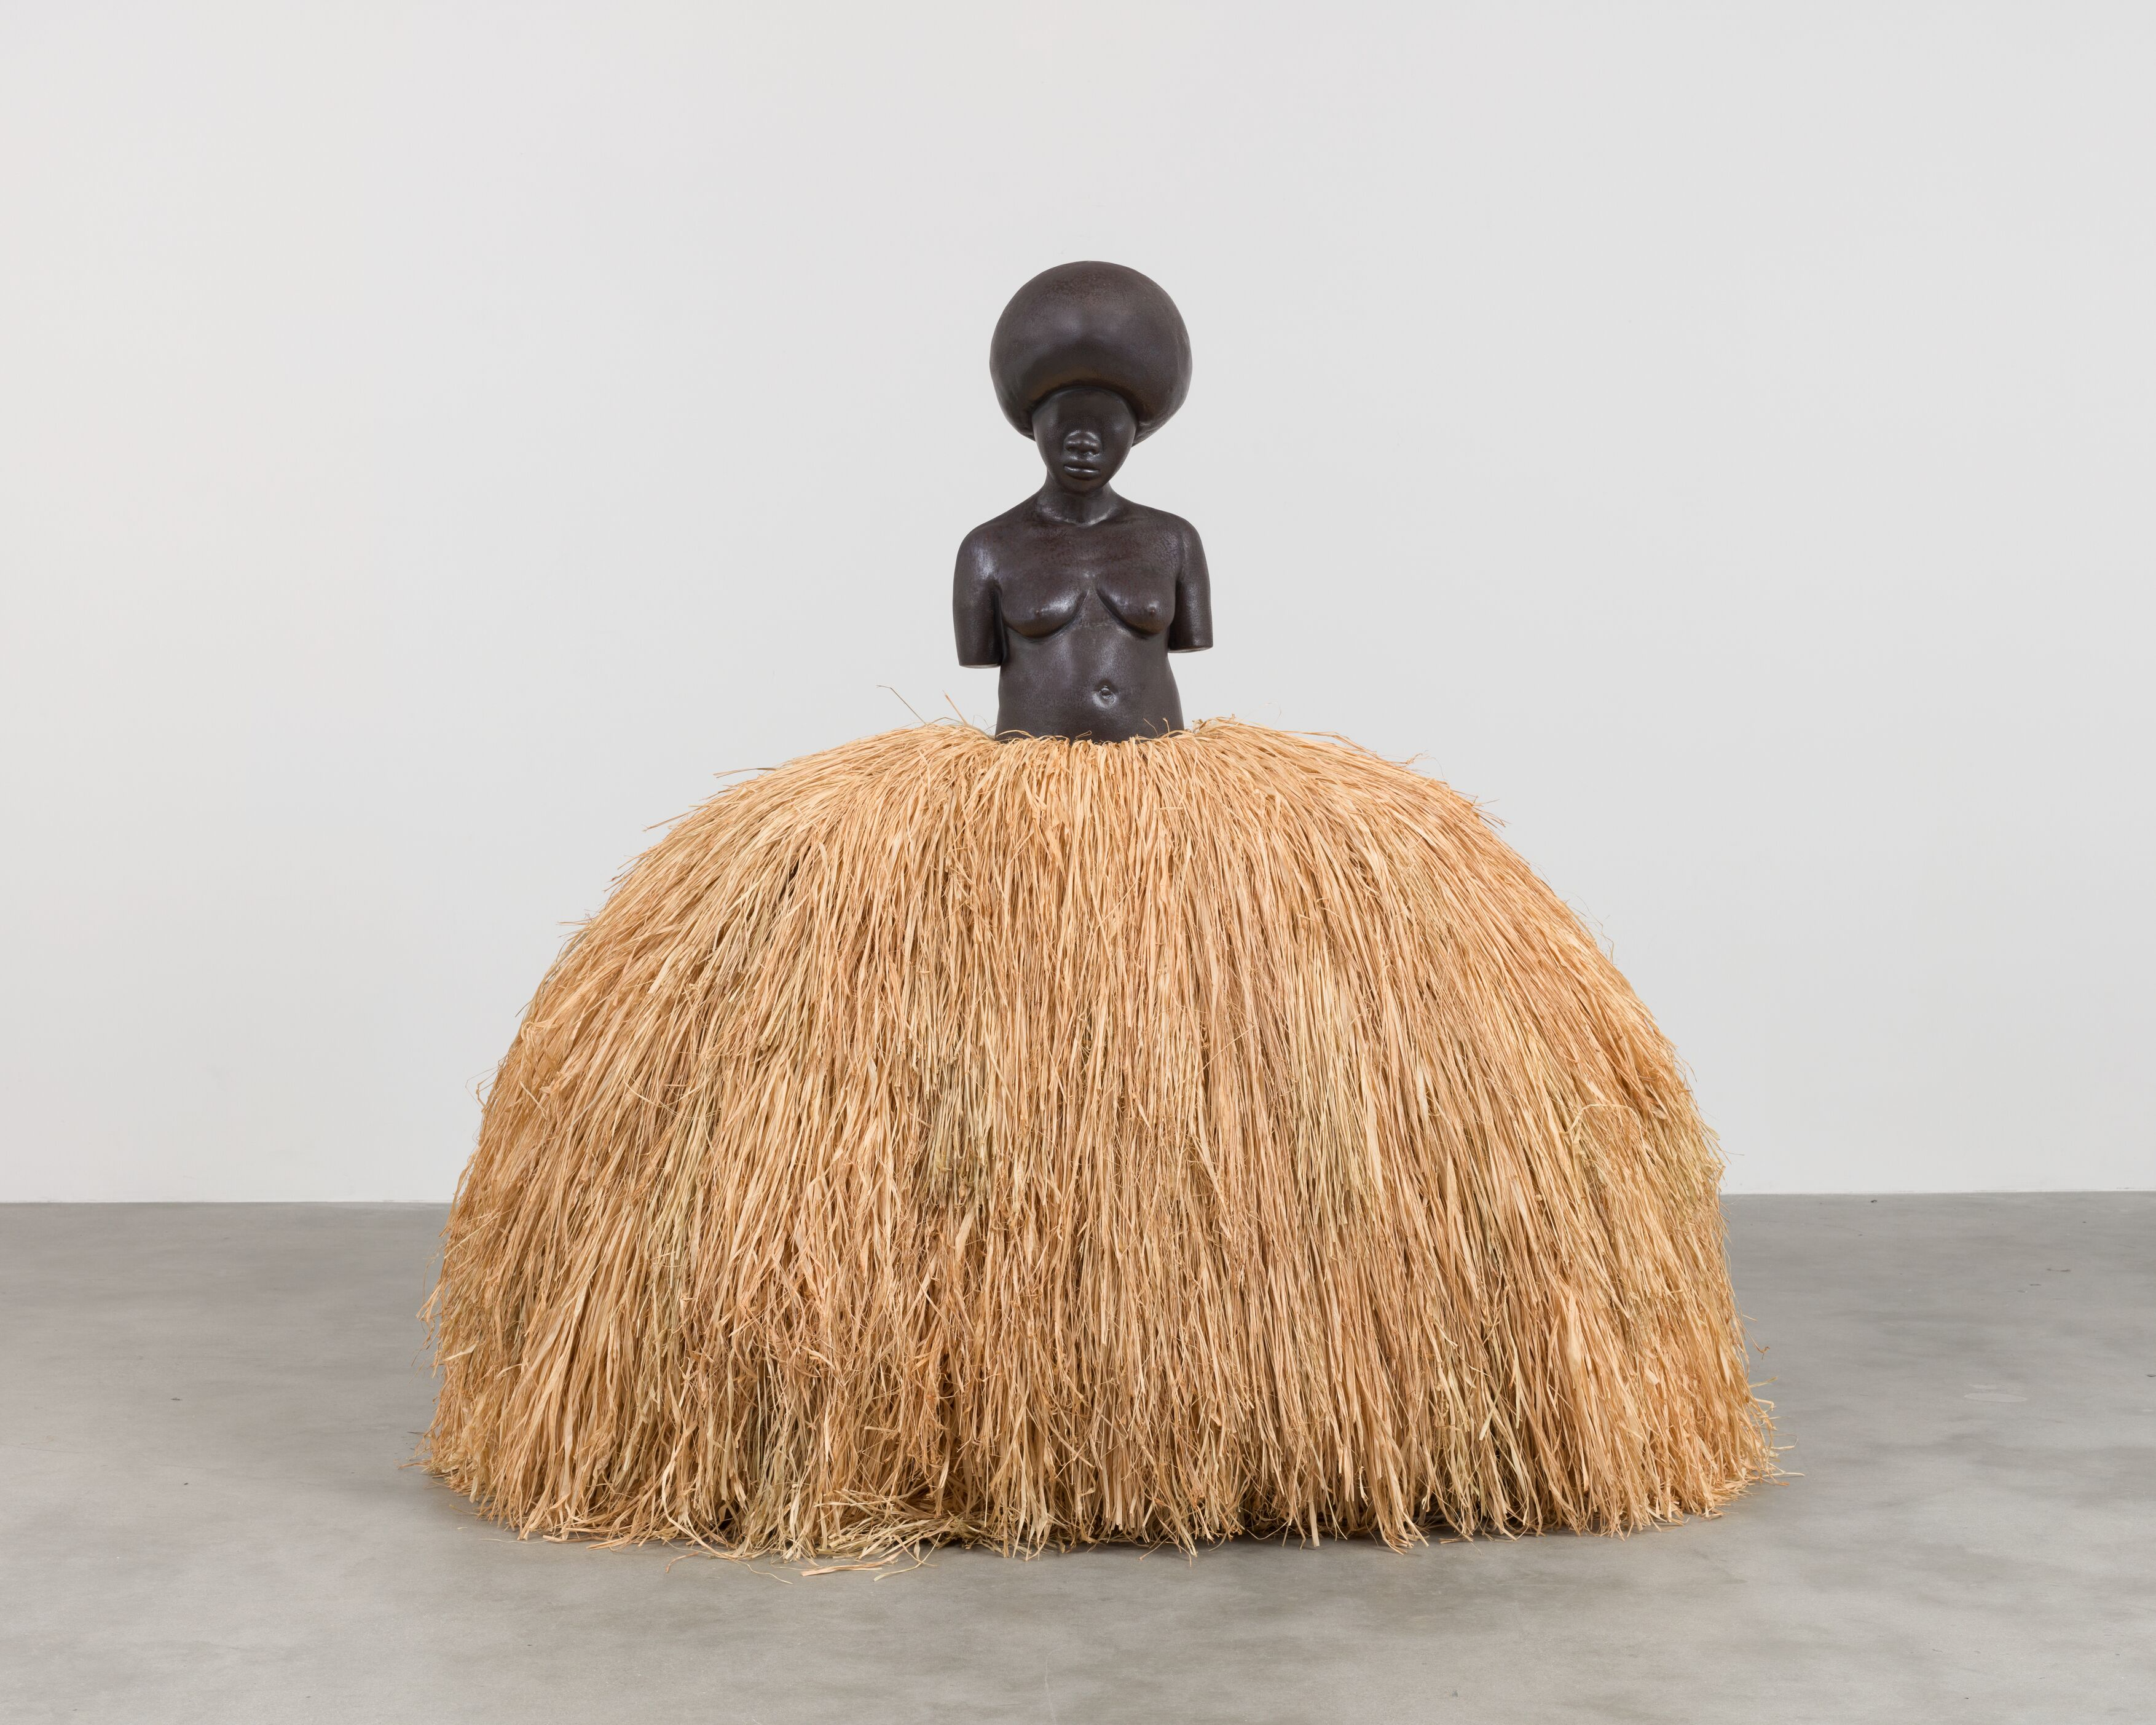 Sculpture of an African woman wearing a large skirt made of hay